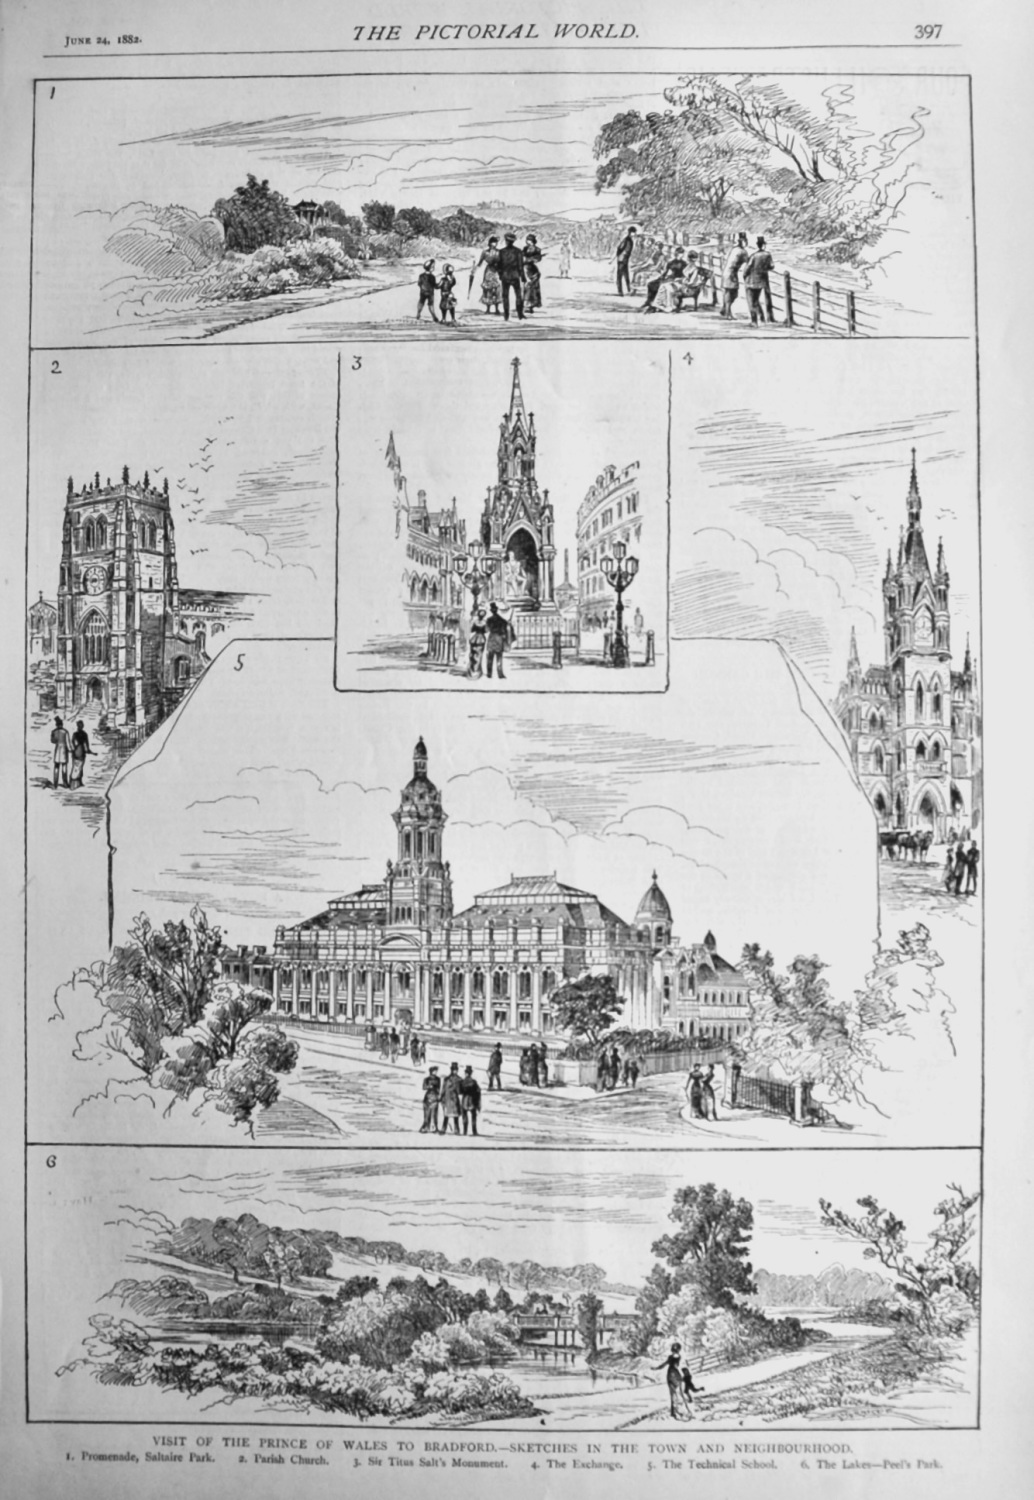 Visit of the Prince of Wales to Bradford.- Sketches in the town and Neighbo